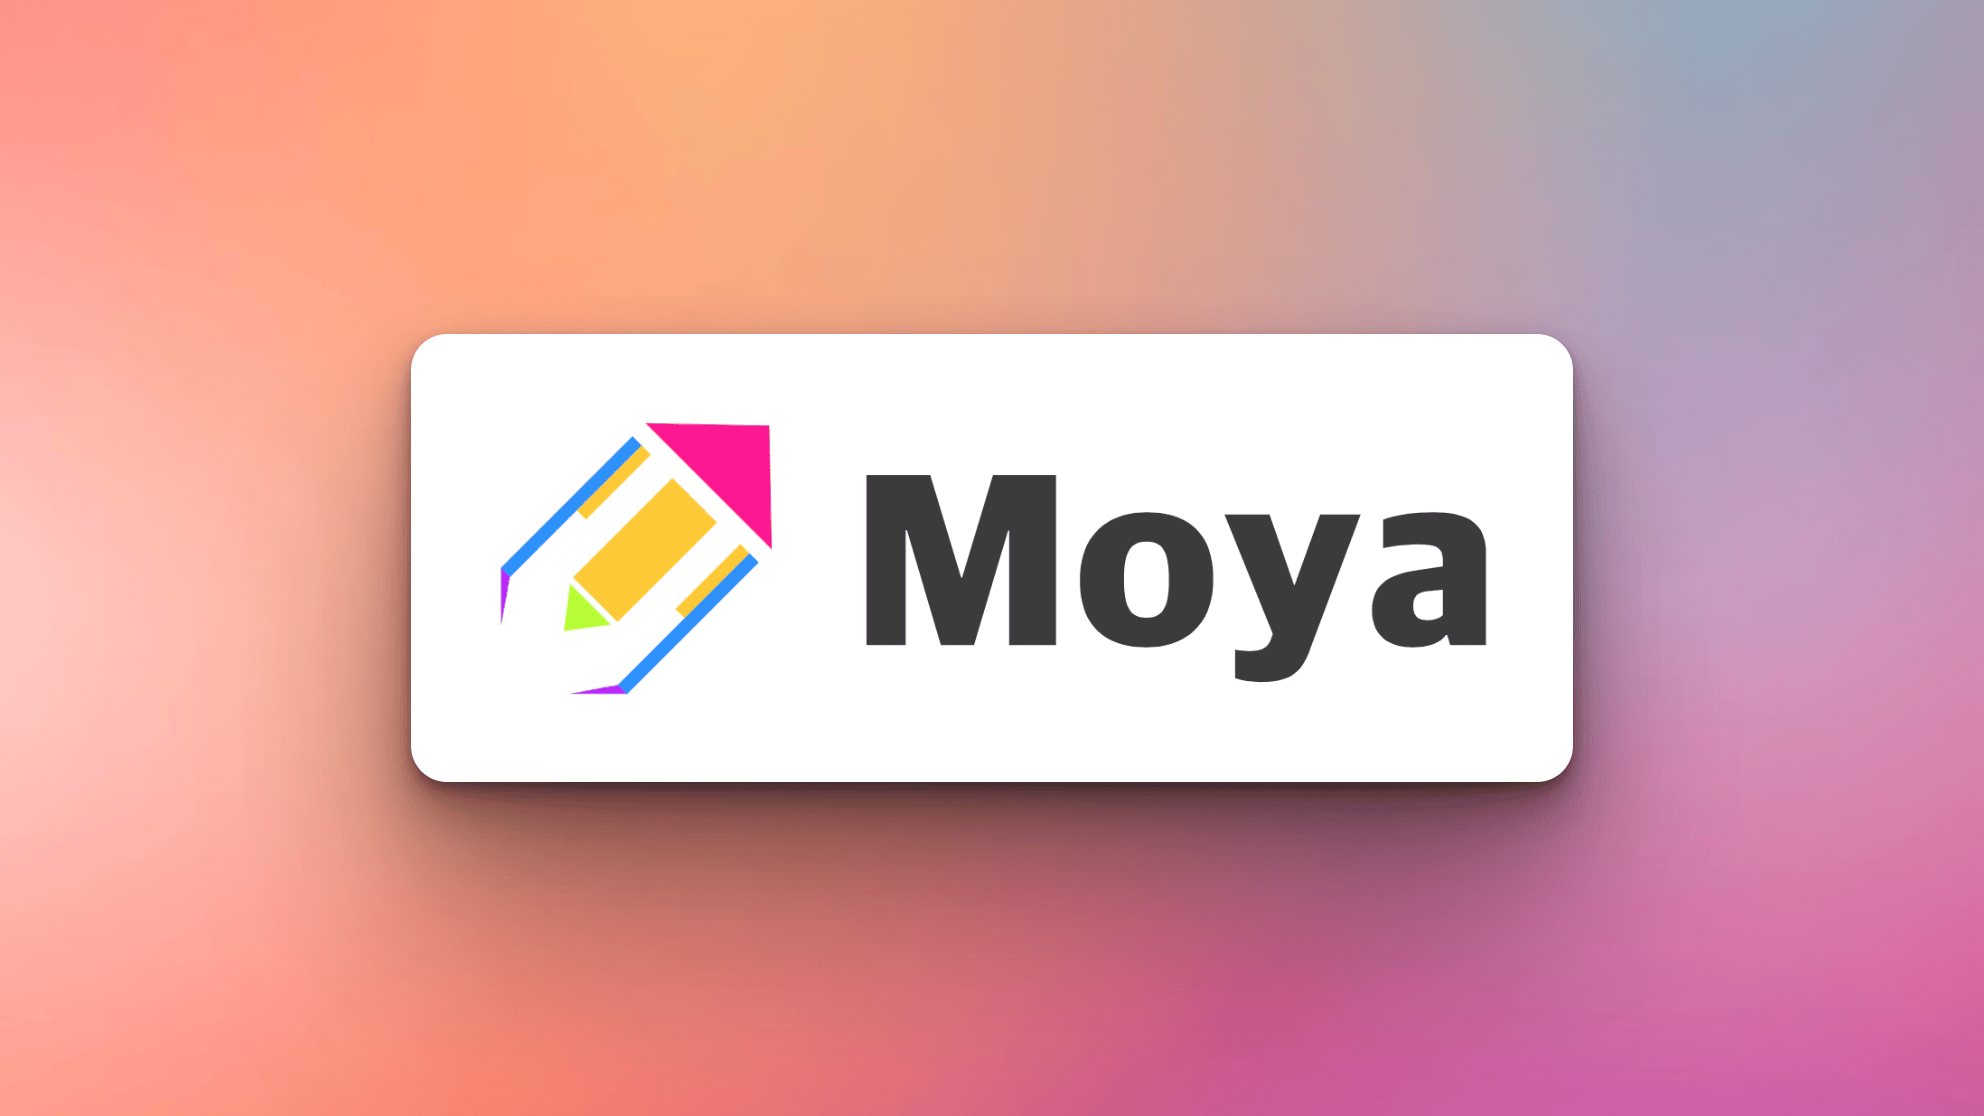 Easy Networking and Testing with Moya